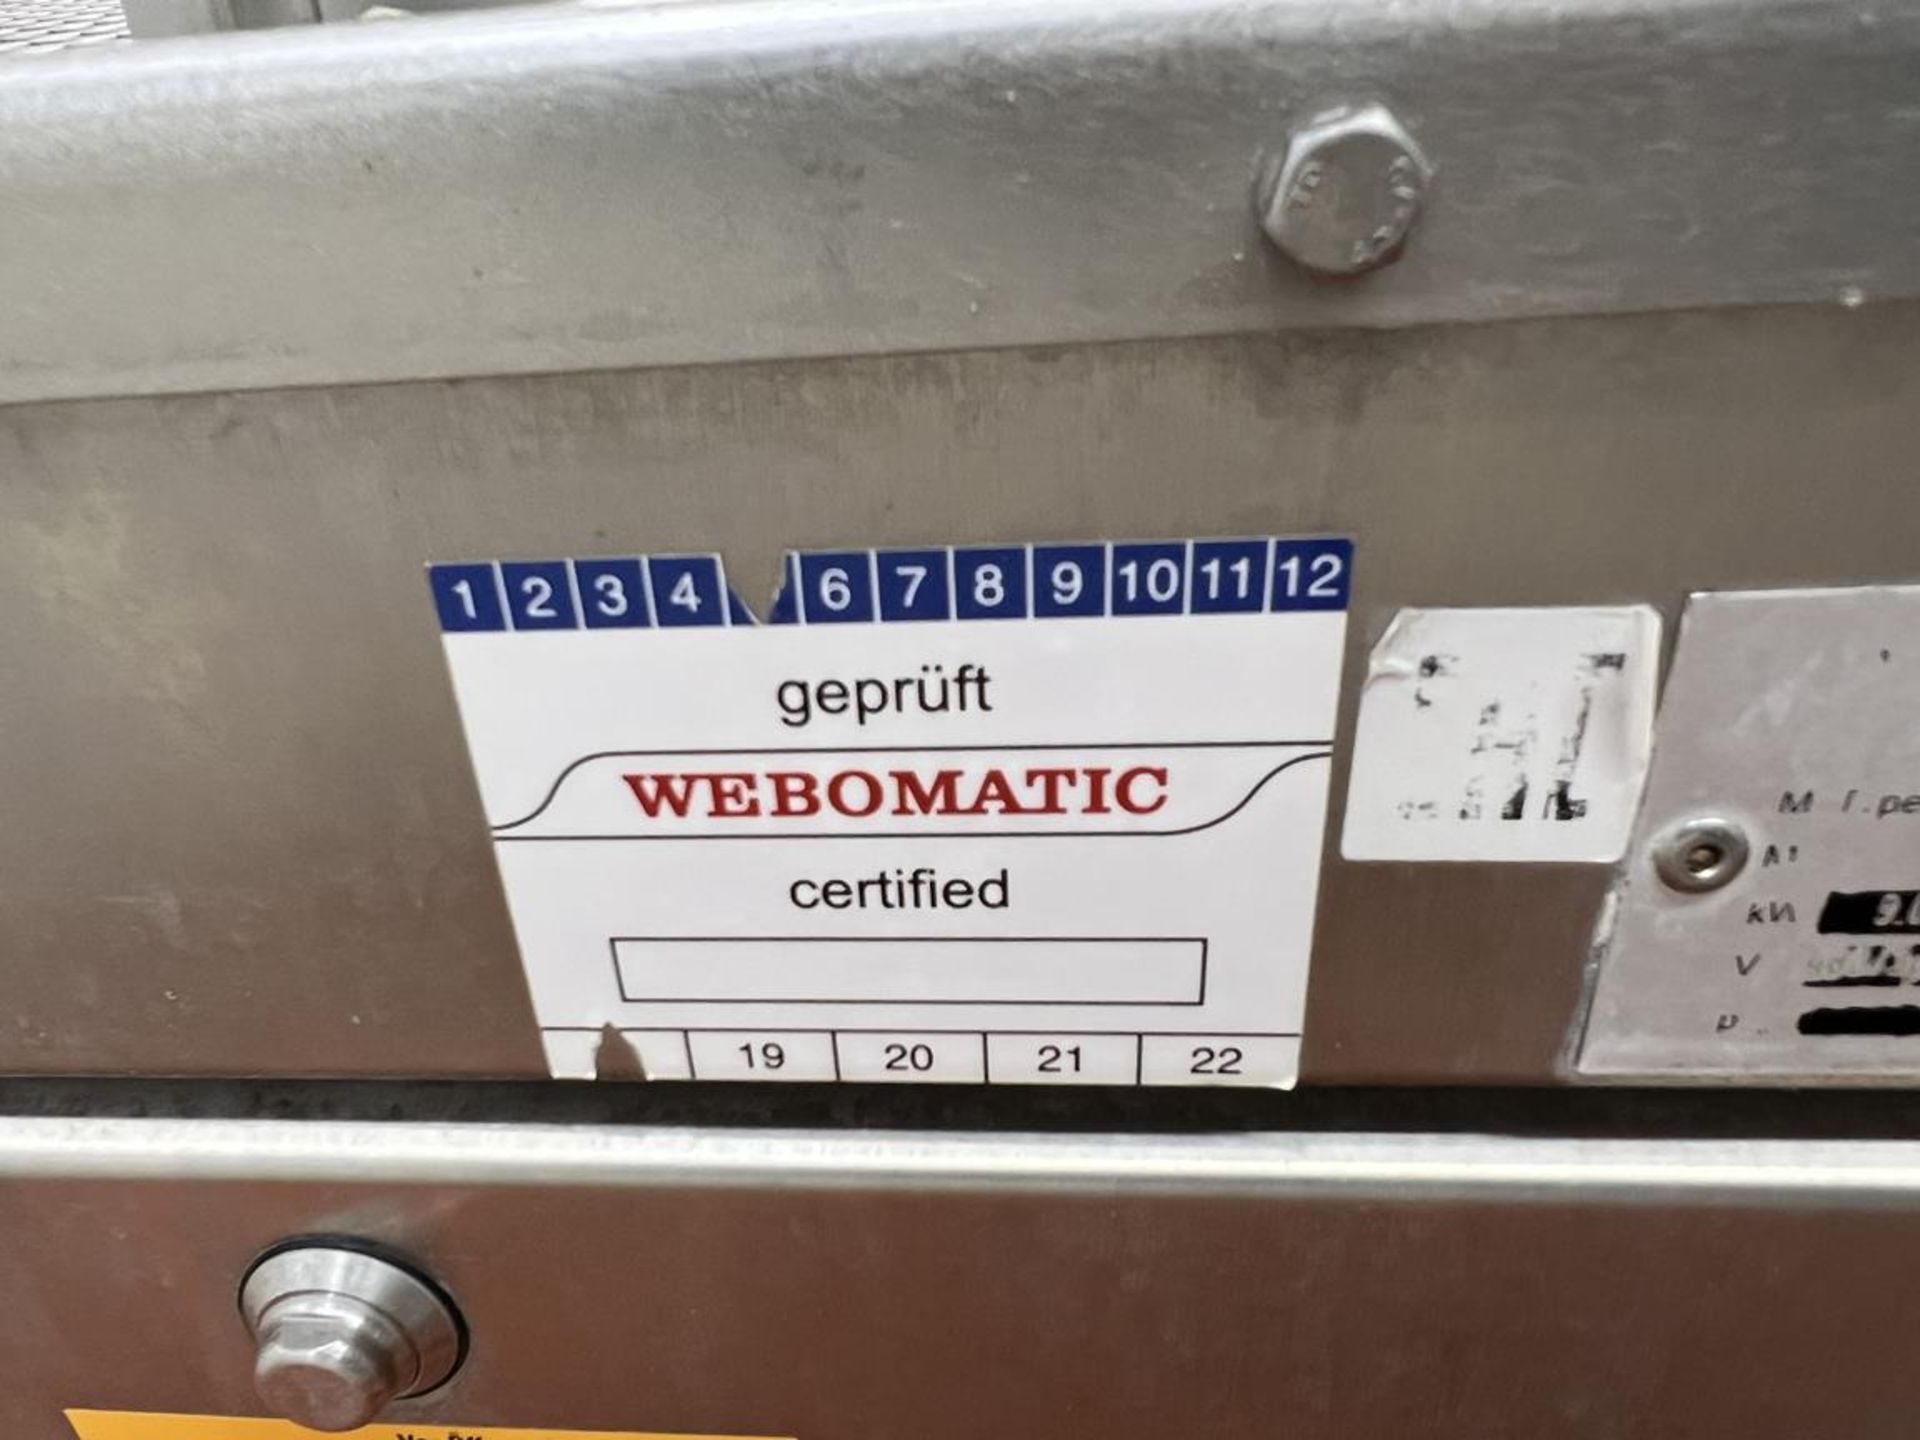 Webomatic, ST40 shrink tank, Serial No. 27021E161 (DOM: 2018) with Jumo Dieco control, 400v, 3 Ph. - Image 10 of 12